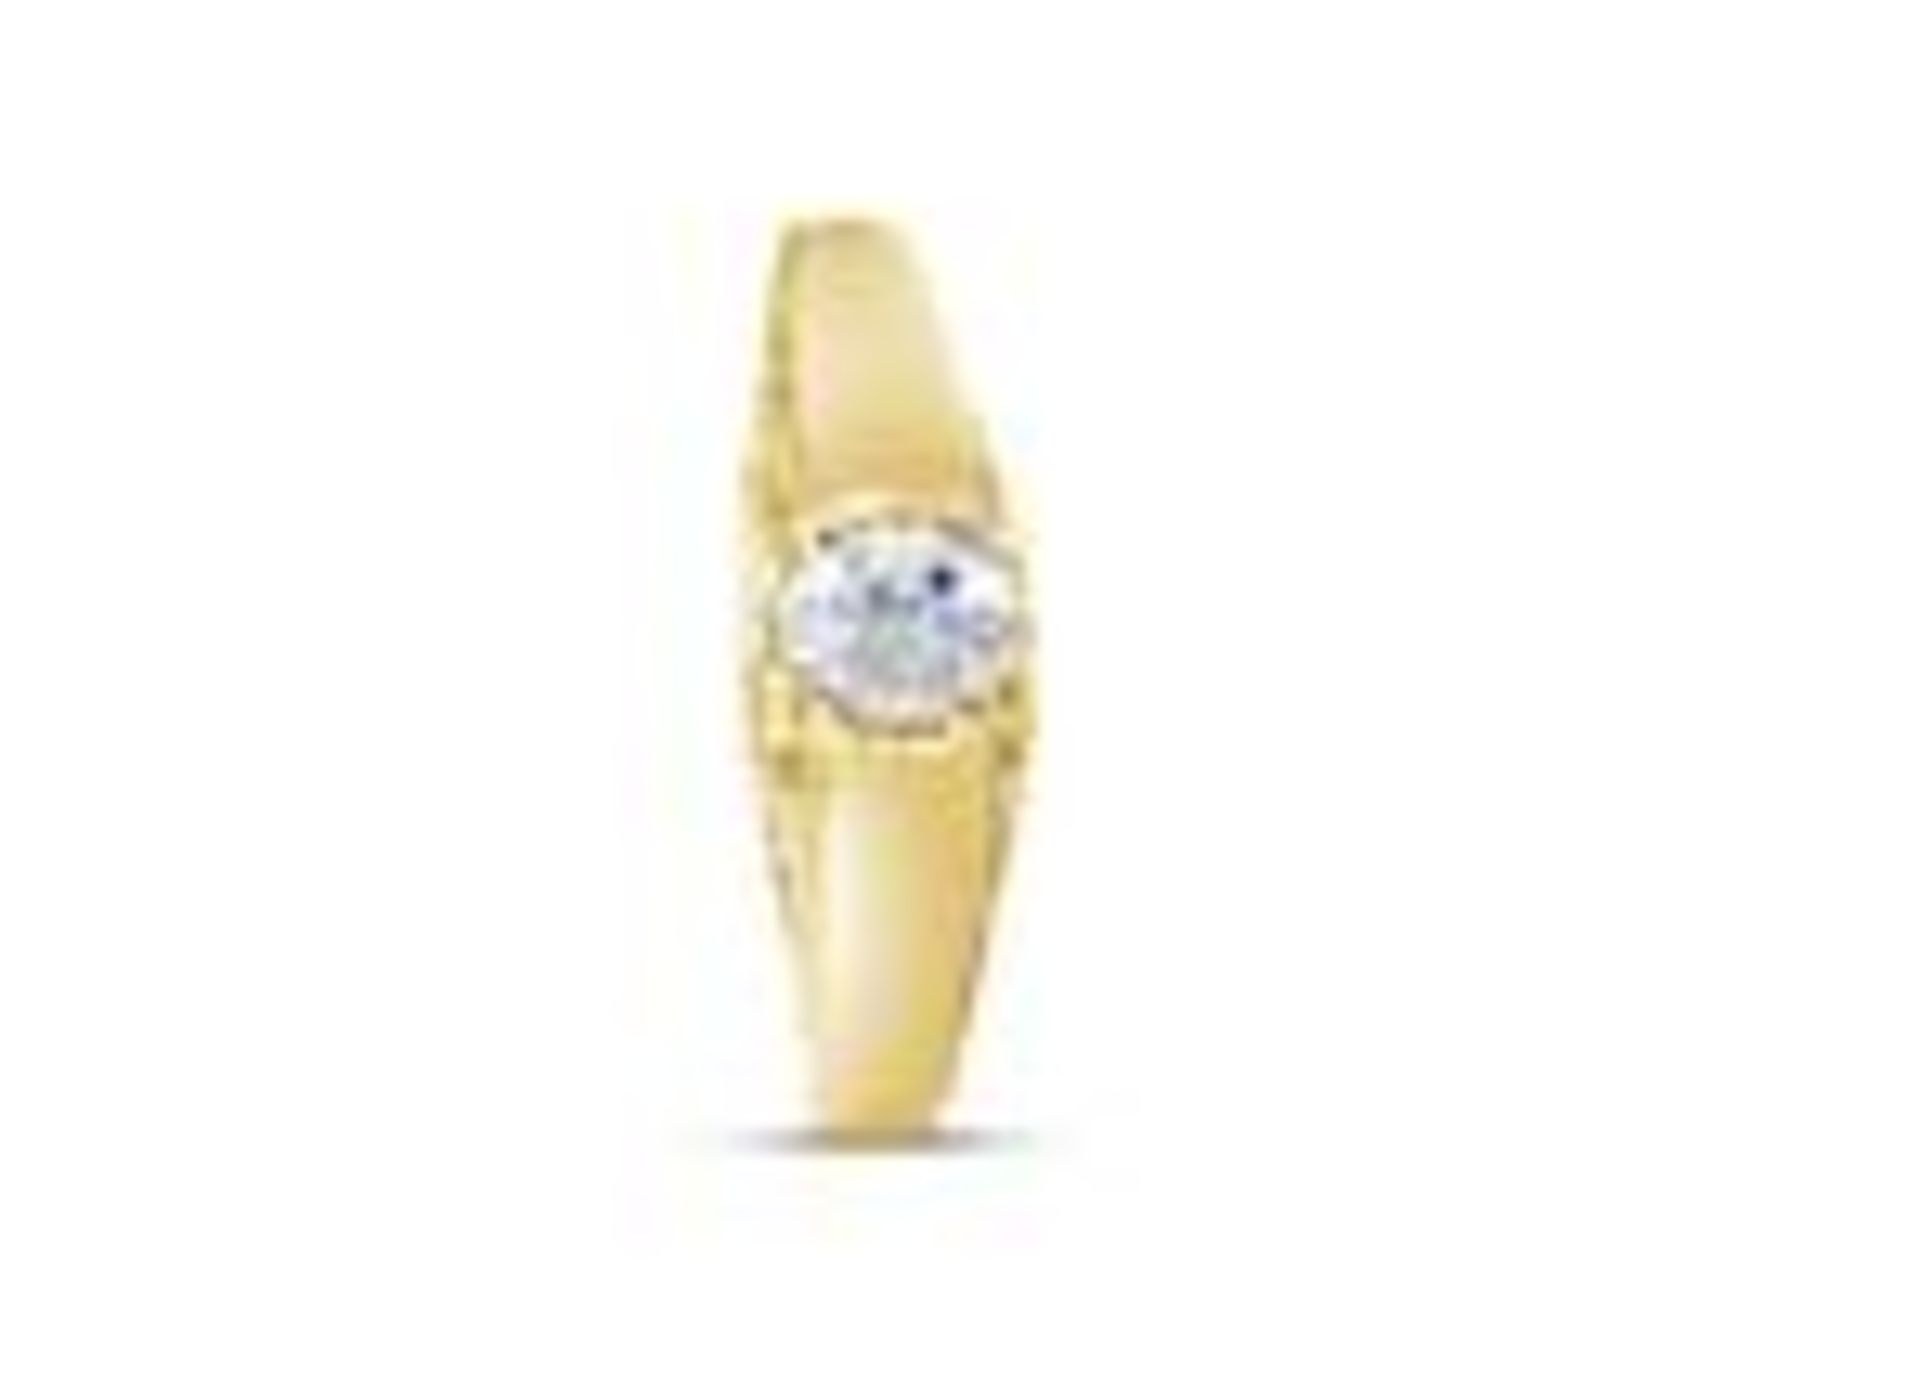 Diamond Ring, 9ct Yellow Gold, Weight 1.56g, Diamond Weight 0.16ct, Colour H, Clarity SI1-SI2,